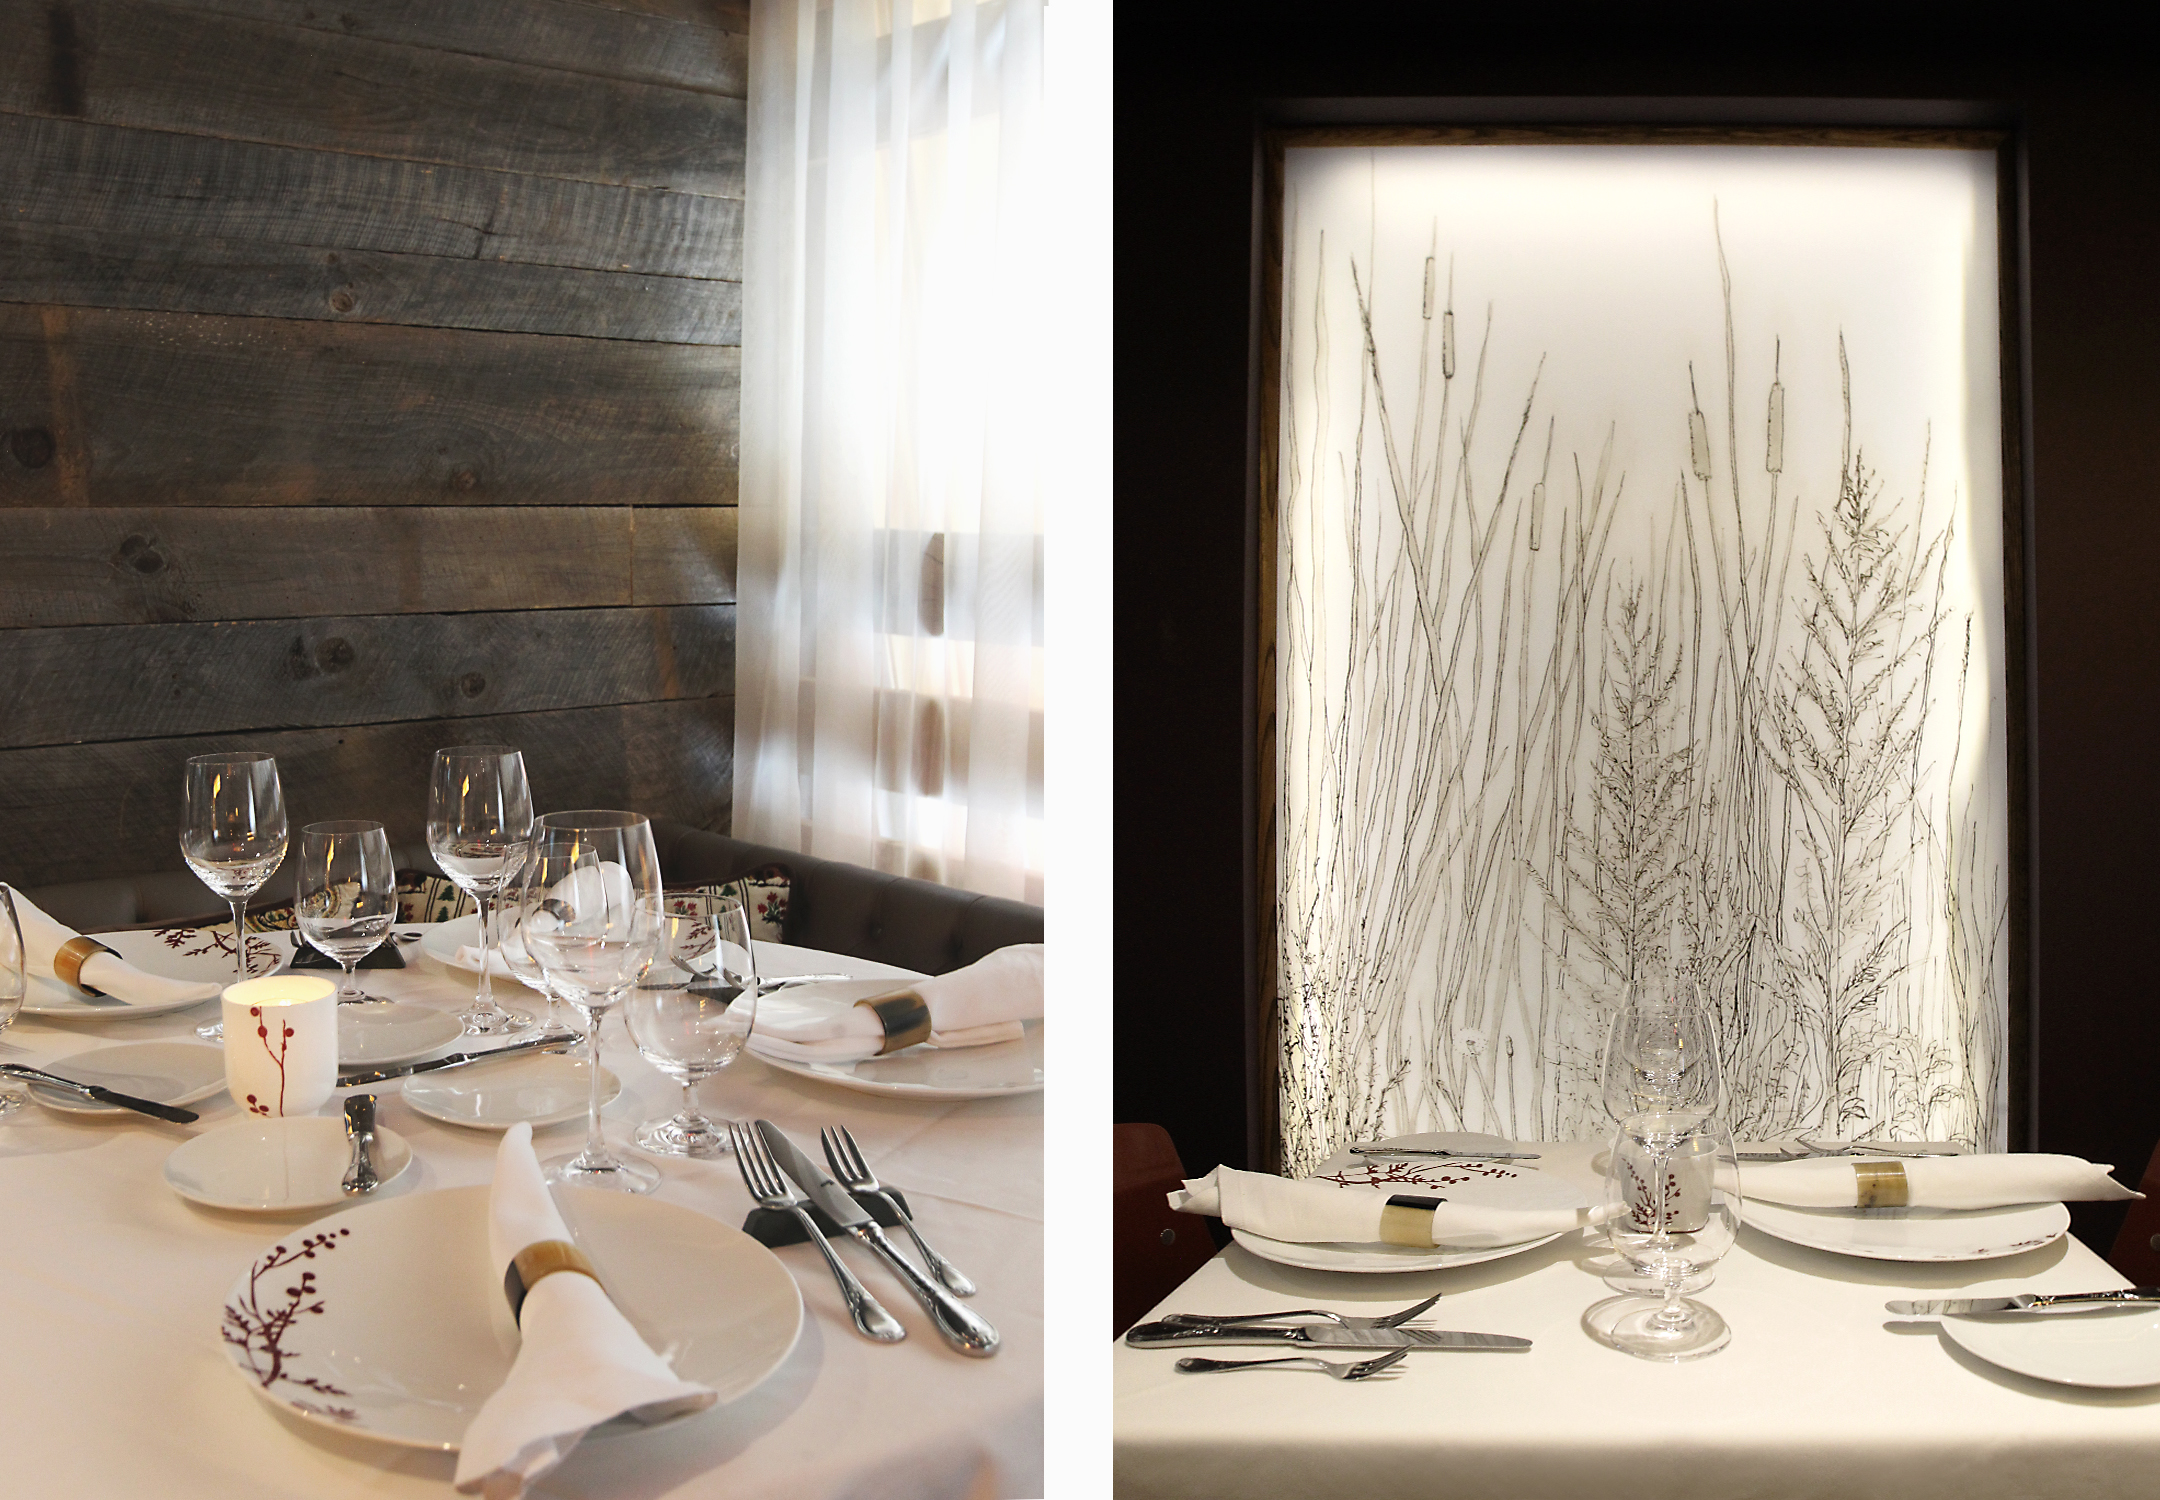 The rear dining room was refreshed with a darker palette, contrasting with the new 'art-windows': Amalgam custom designed panel of three back-lit botanical illustrations.